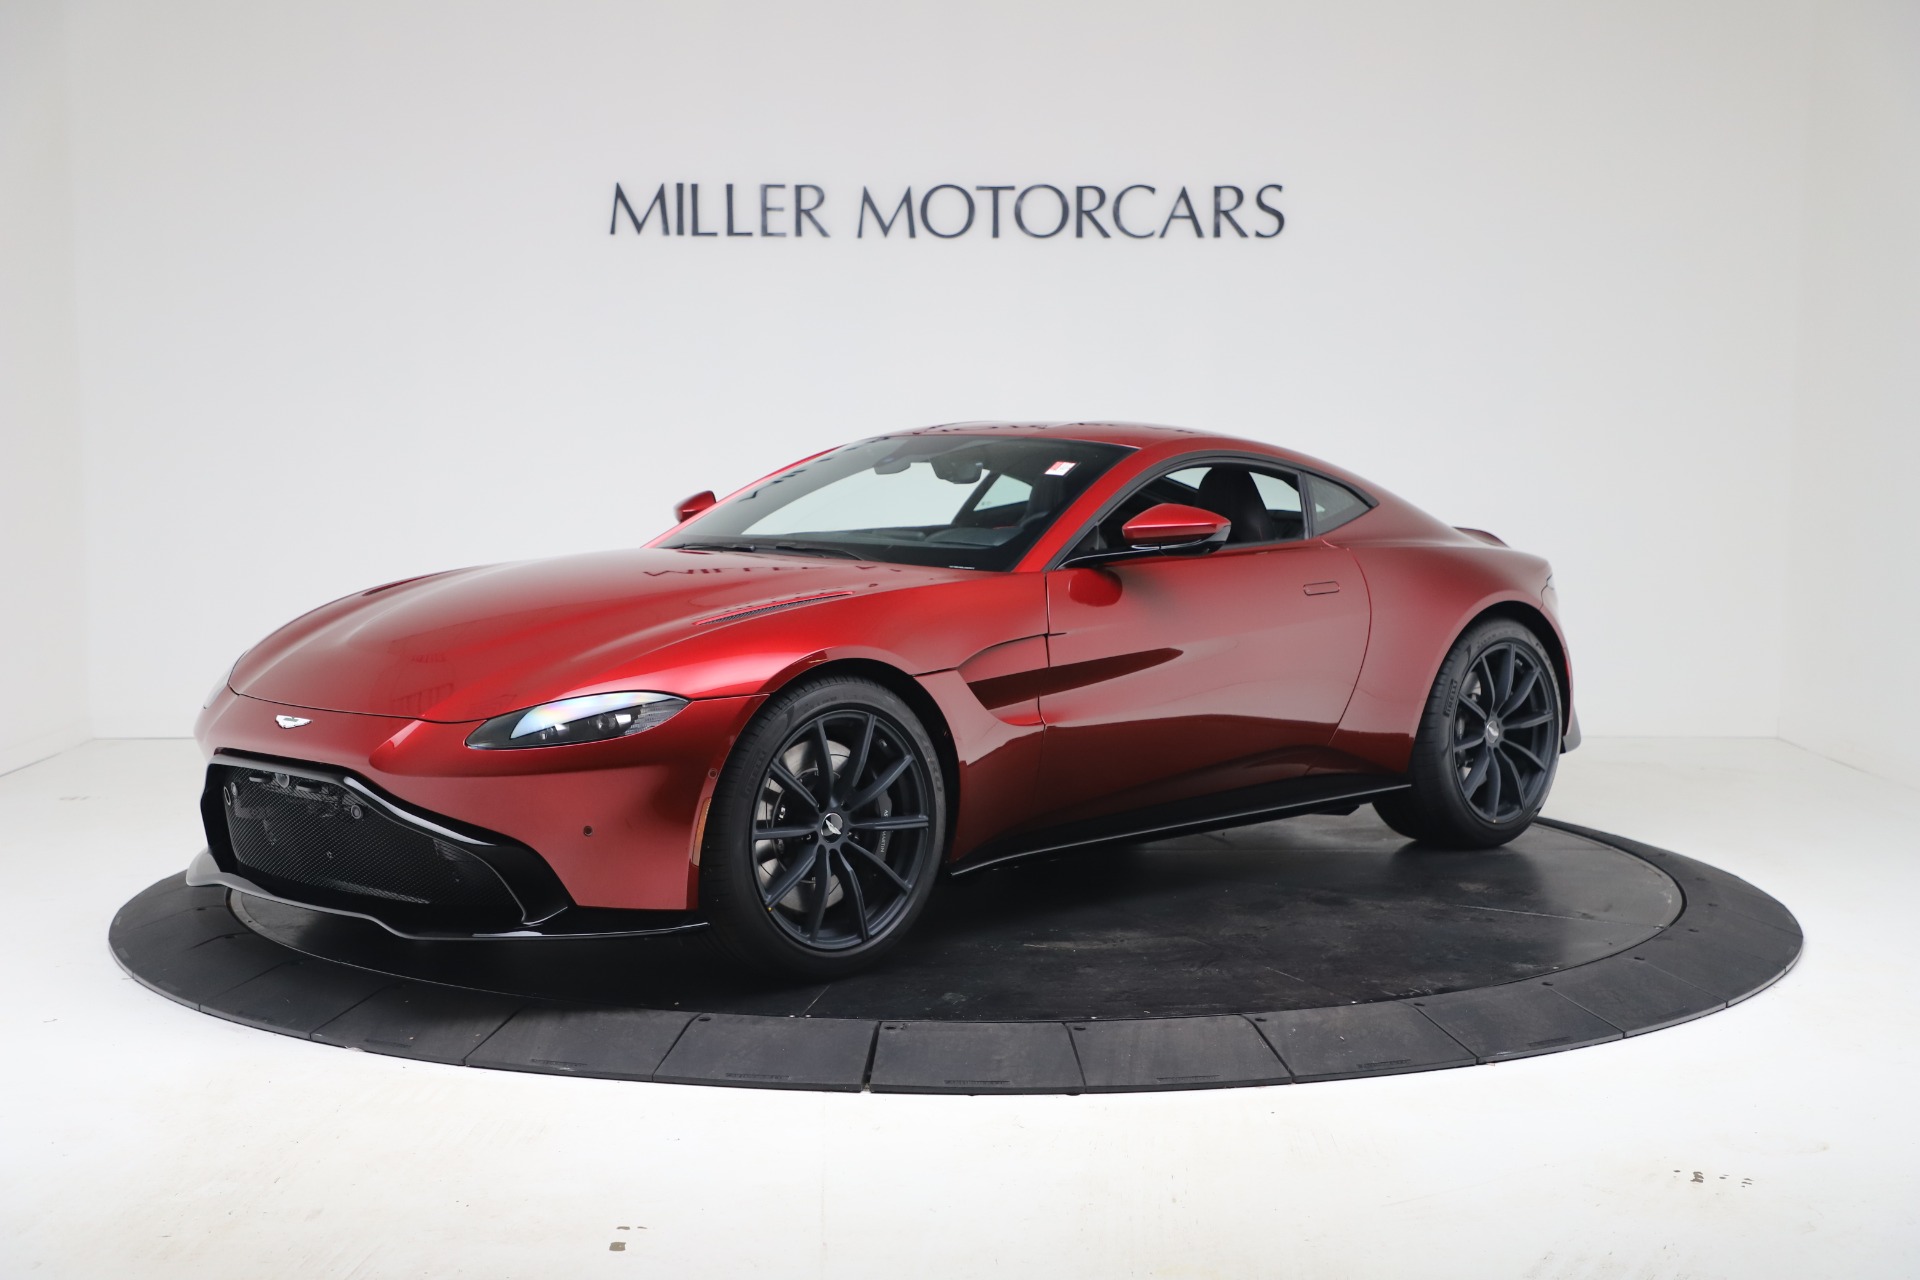 New 2020 Aston Martin Vantage Coupe for sale Sold at Aston Martin of Greenwich in Greenwich CT 06830 1